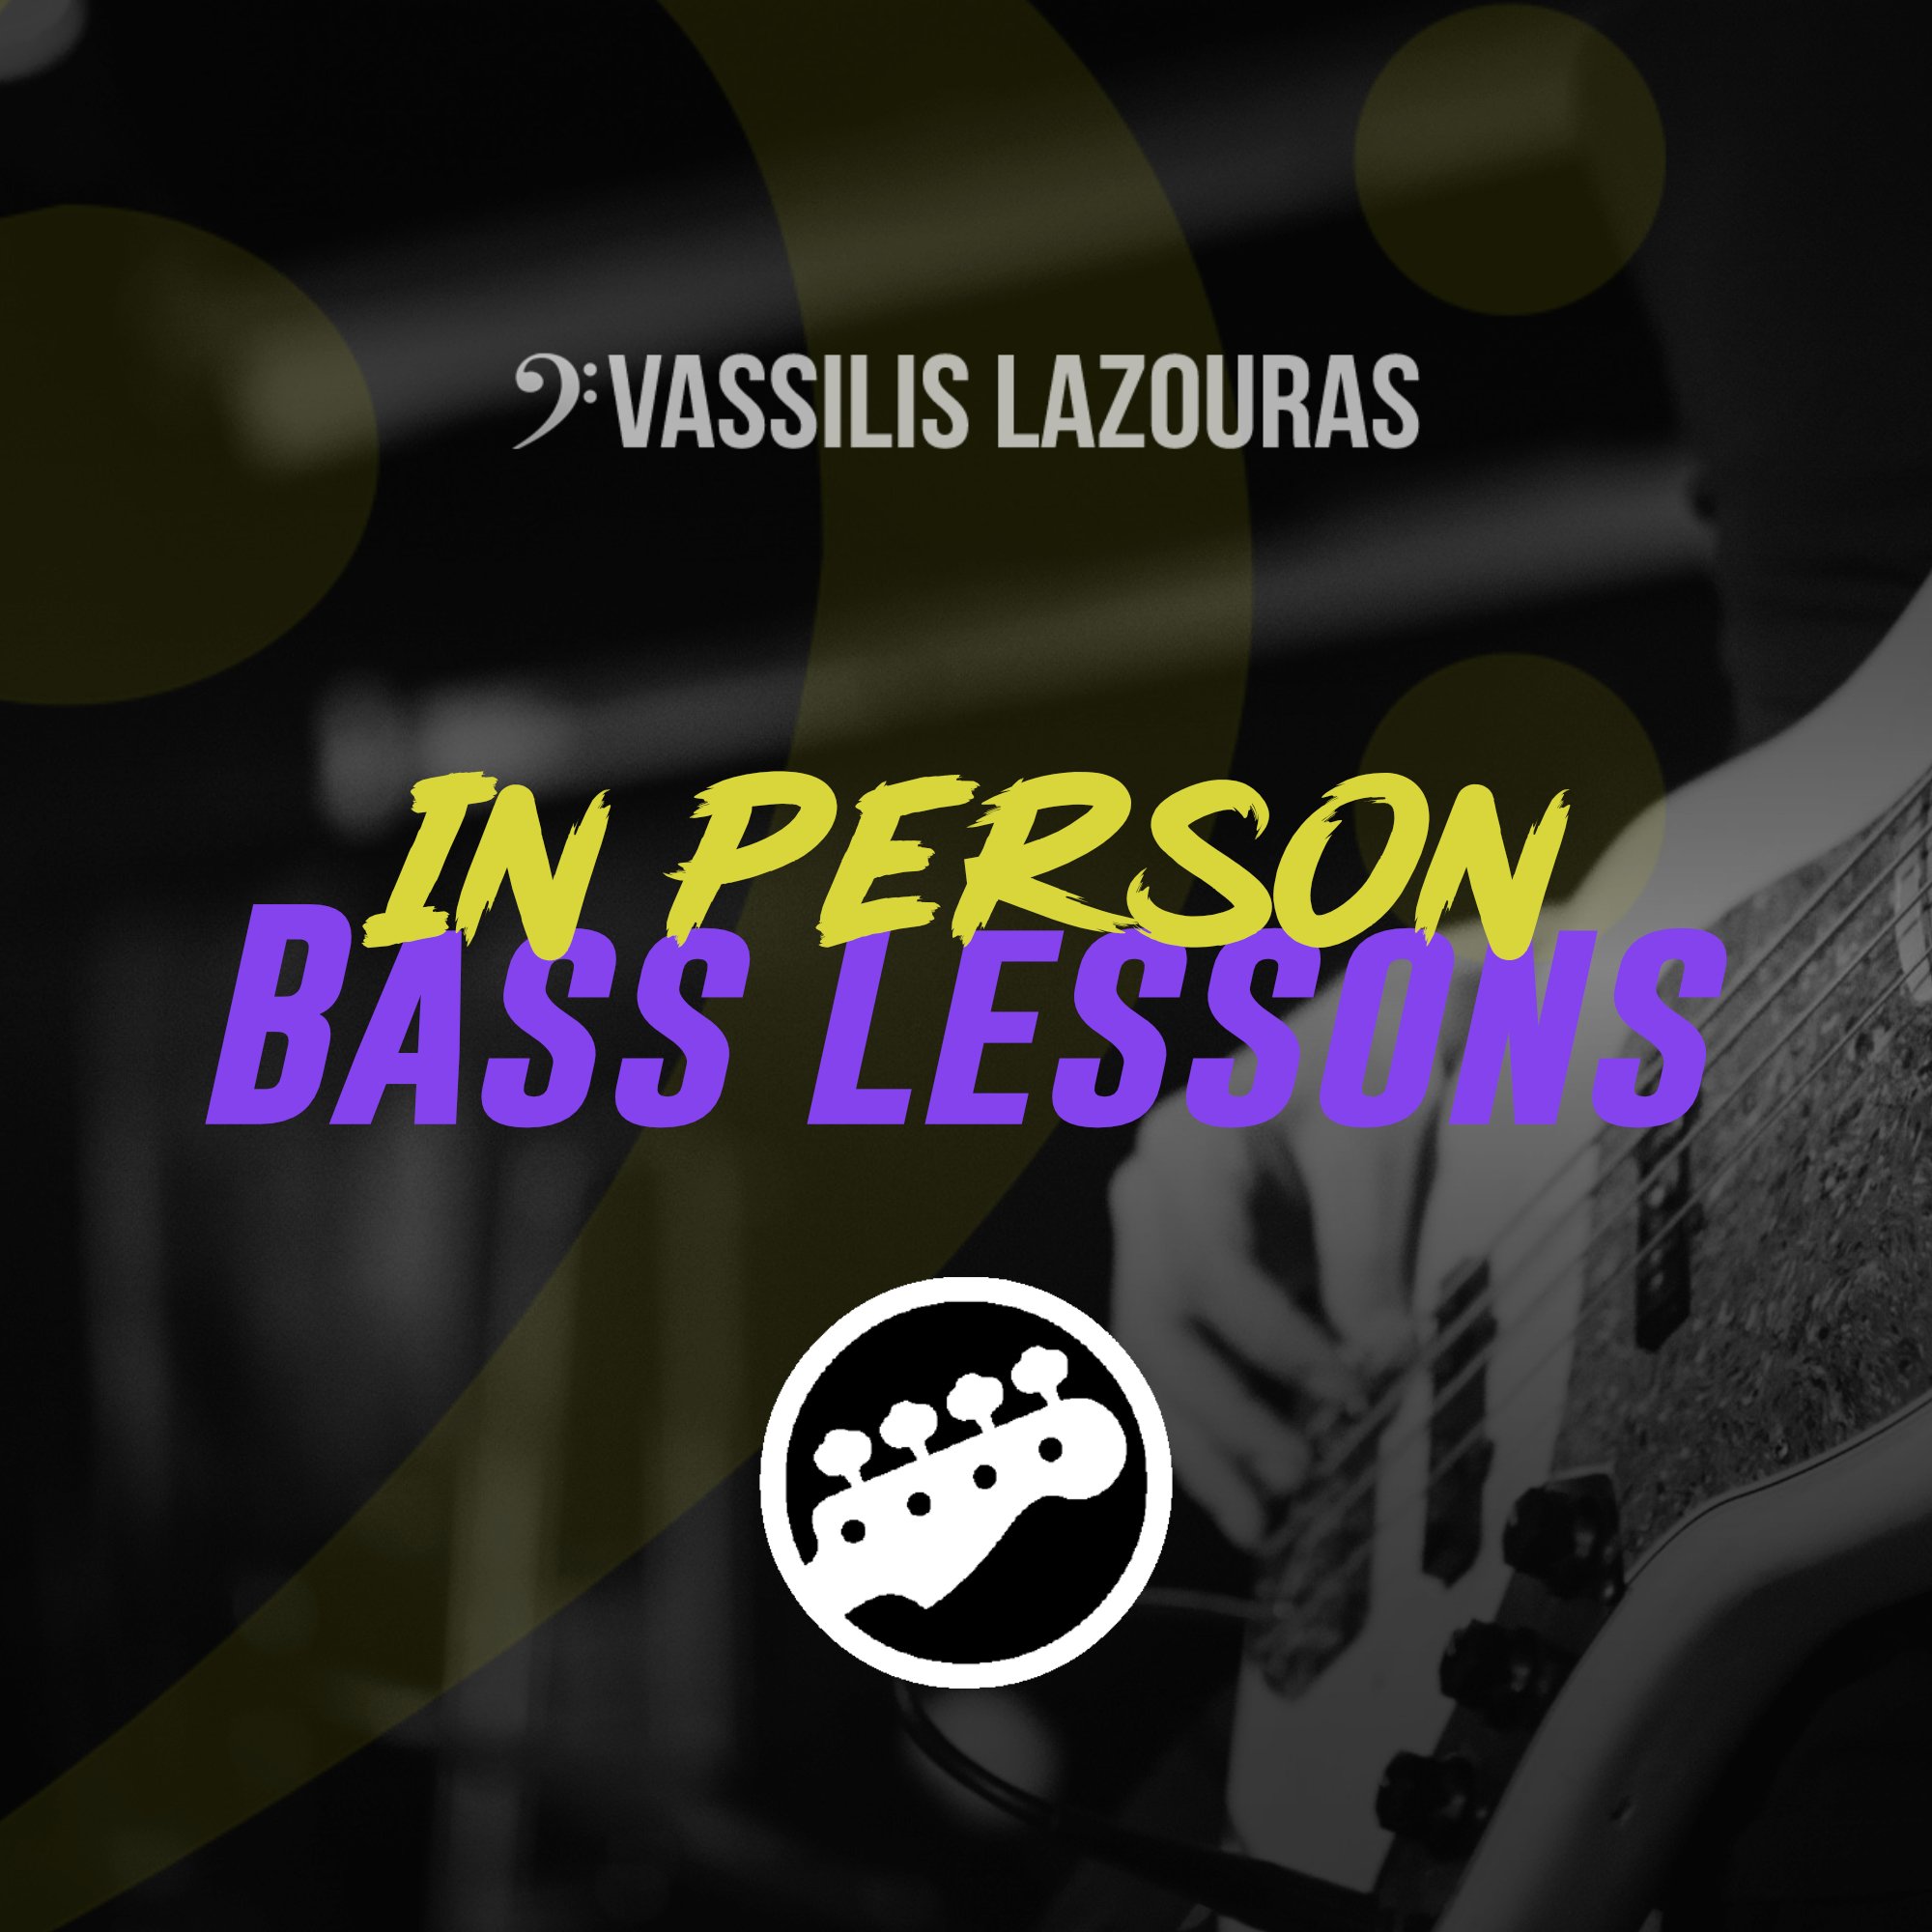 1hr Bass lesson - In Person